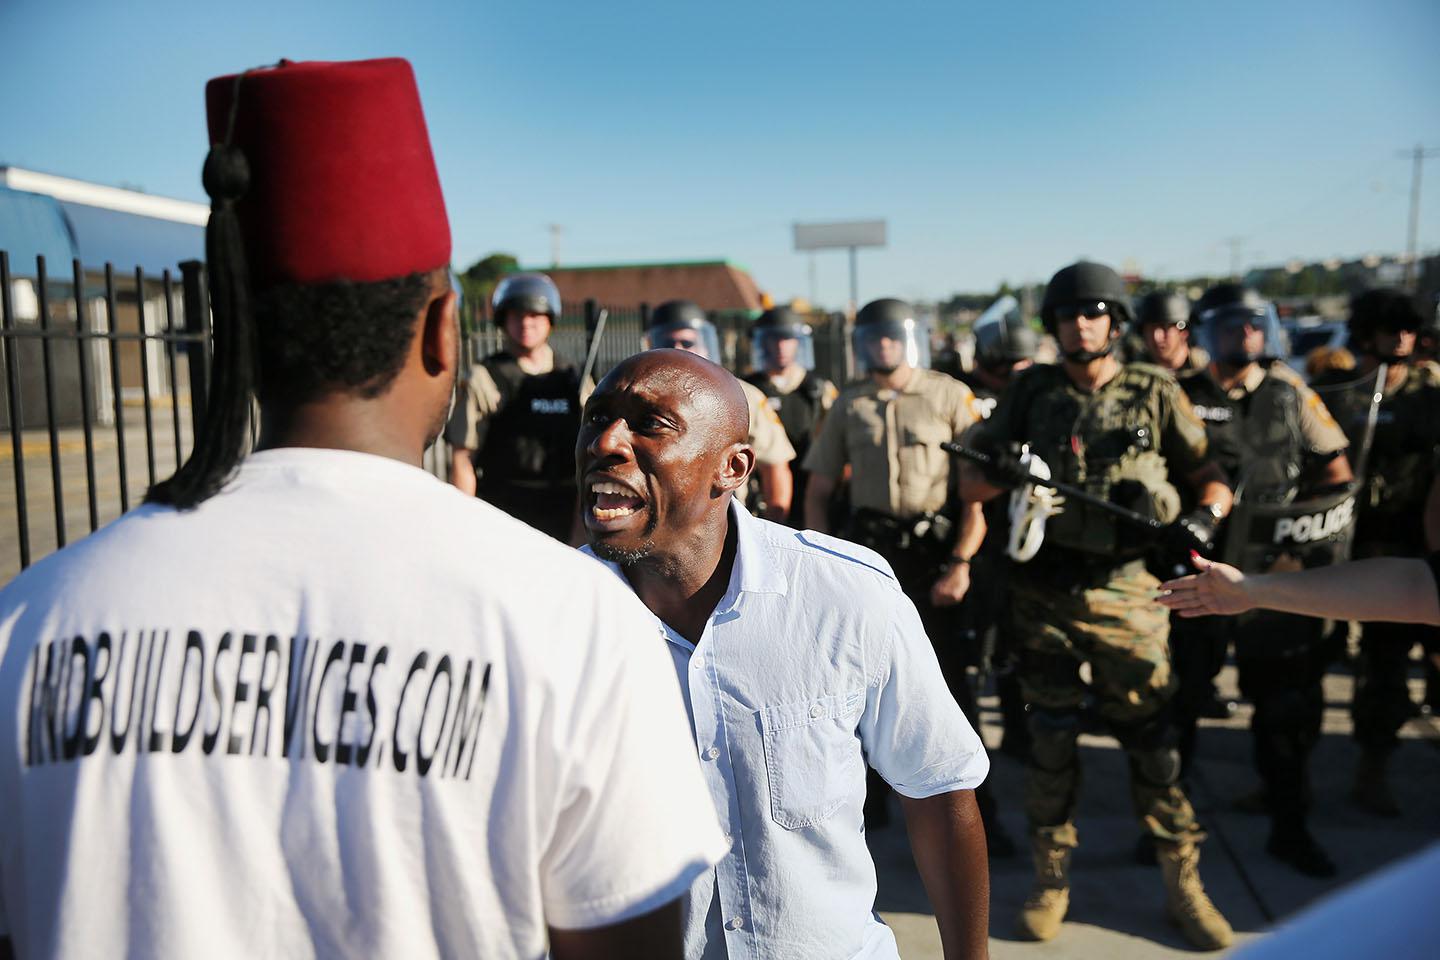 A demonstrator, protesting the shooting death of teenager Michael Brown, pleads with another to walk away after being ordered off the street by police on August 13, 2014 in Ferguson, Missouri. 